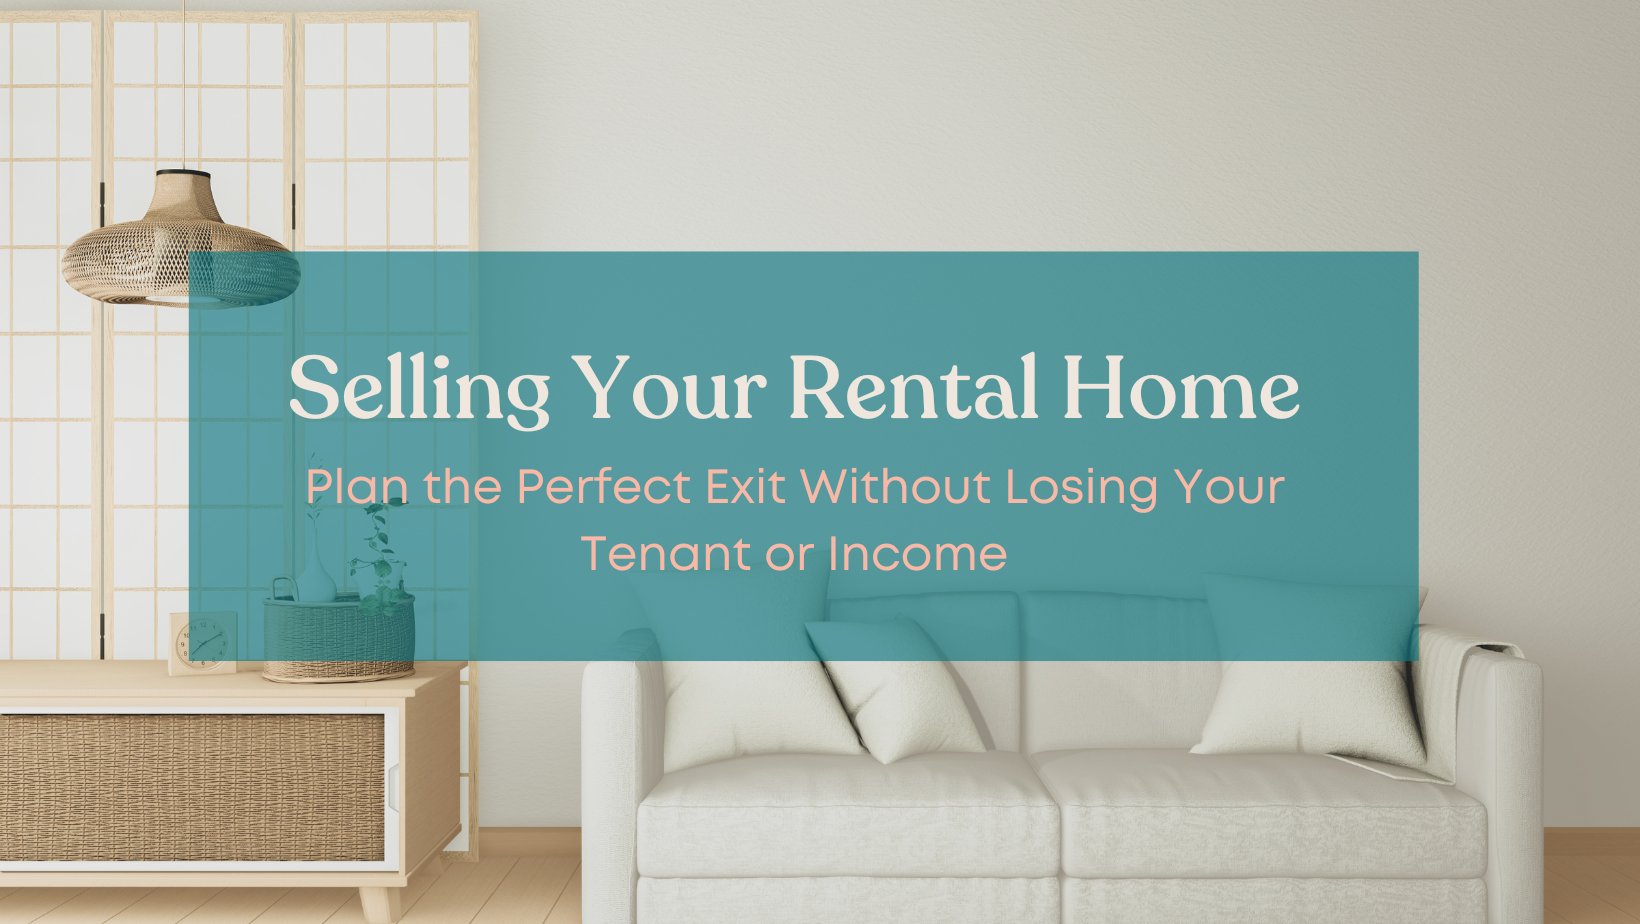 Selling Your Rental Home Without Losing Income